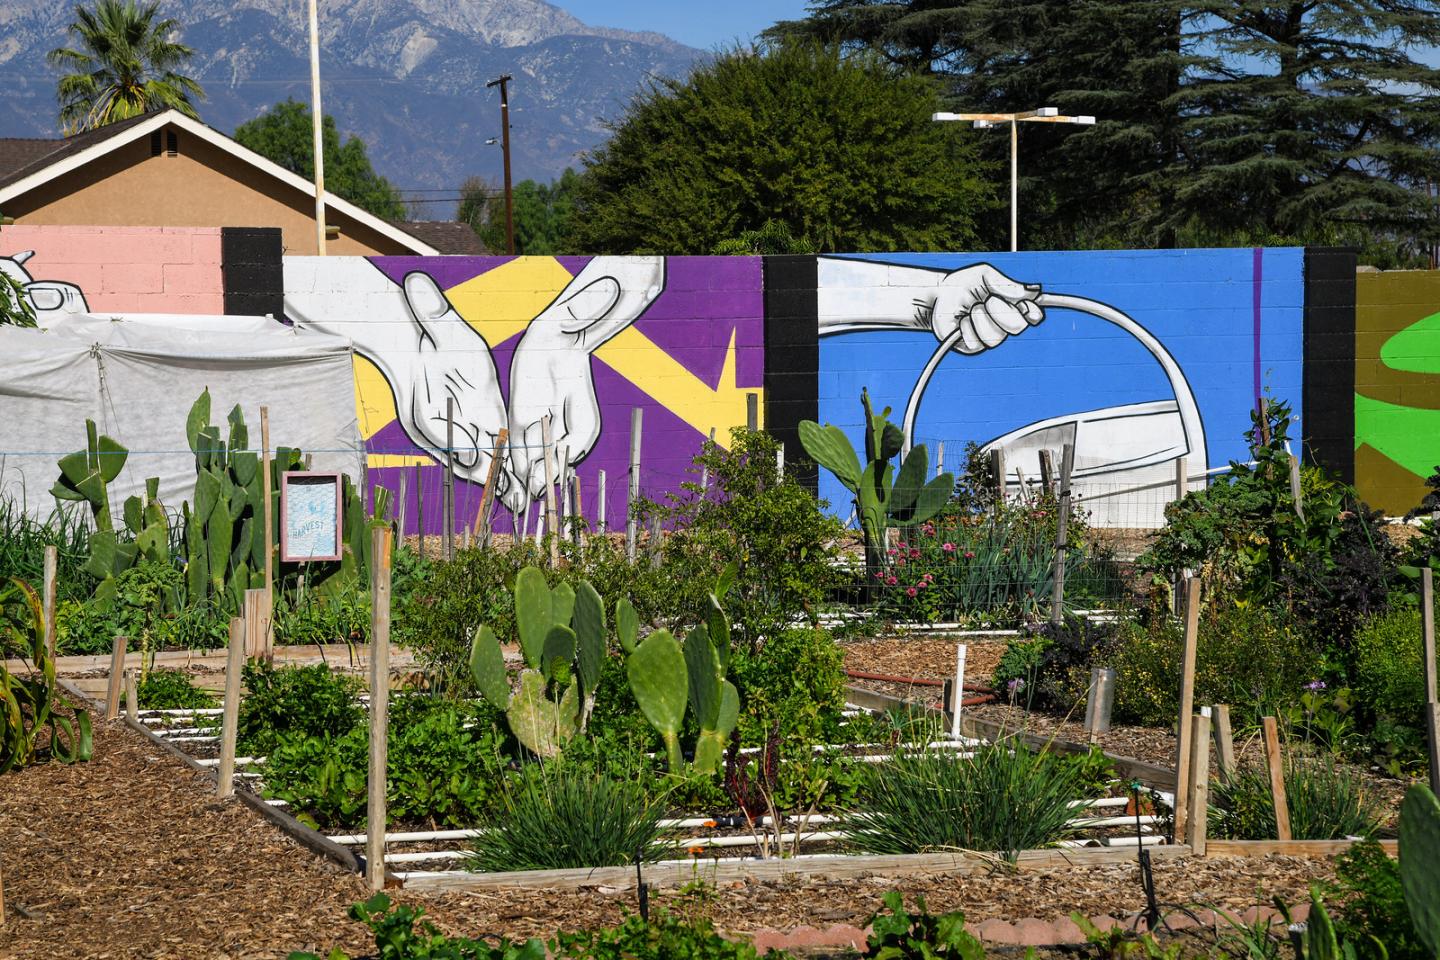 Wall panels with artwork titled "Manos a la obra" (Hands at work) by Manone line one side of the Community garden plots